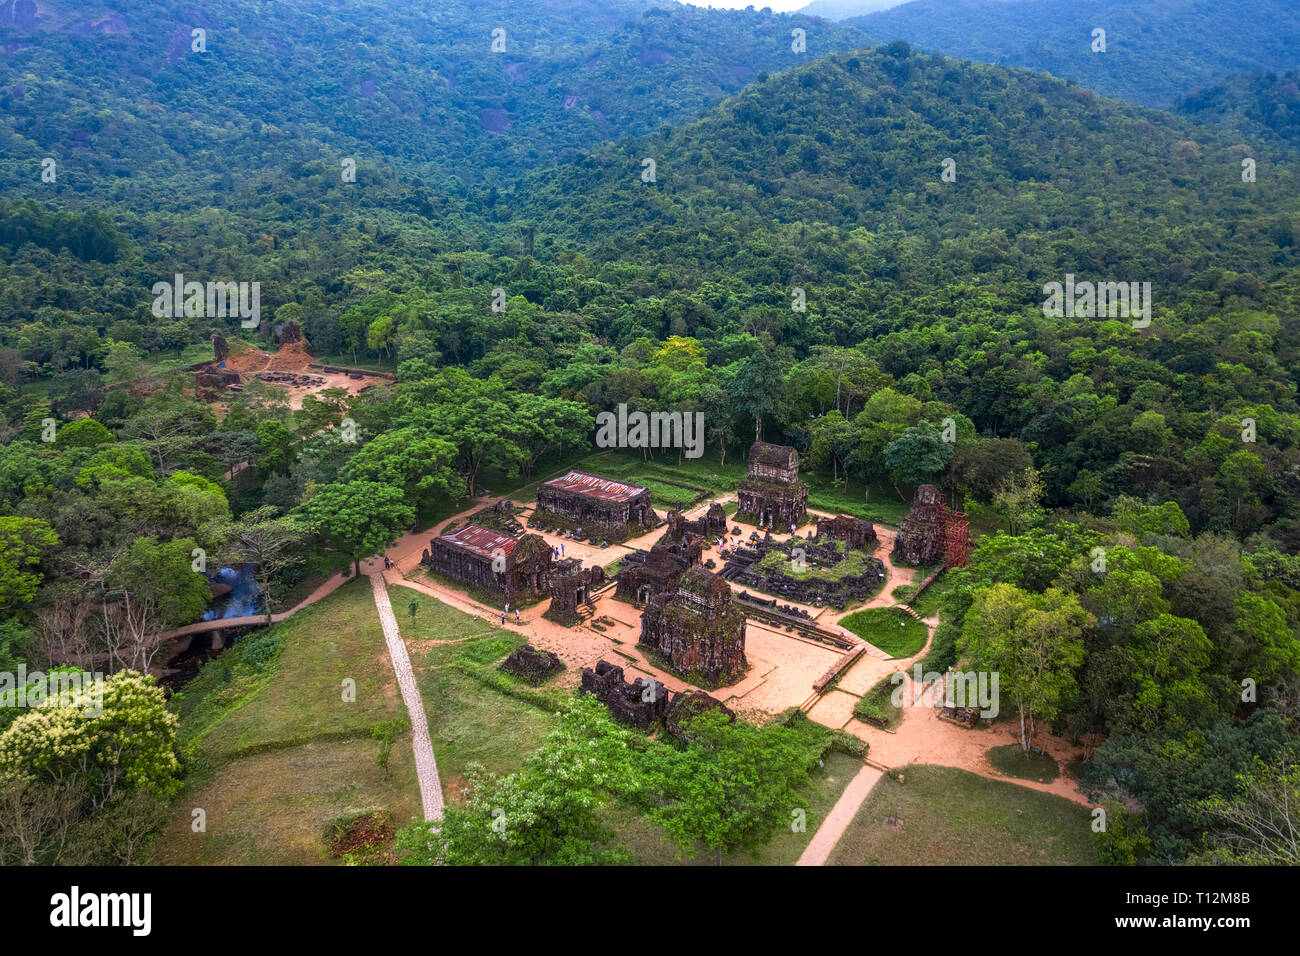 My Son Sanctuary is a large complex of religious relics comprises Cham architectural works. A UNESCO world heritage site in Quang Nam, Vietnam. Stock Photo